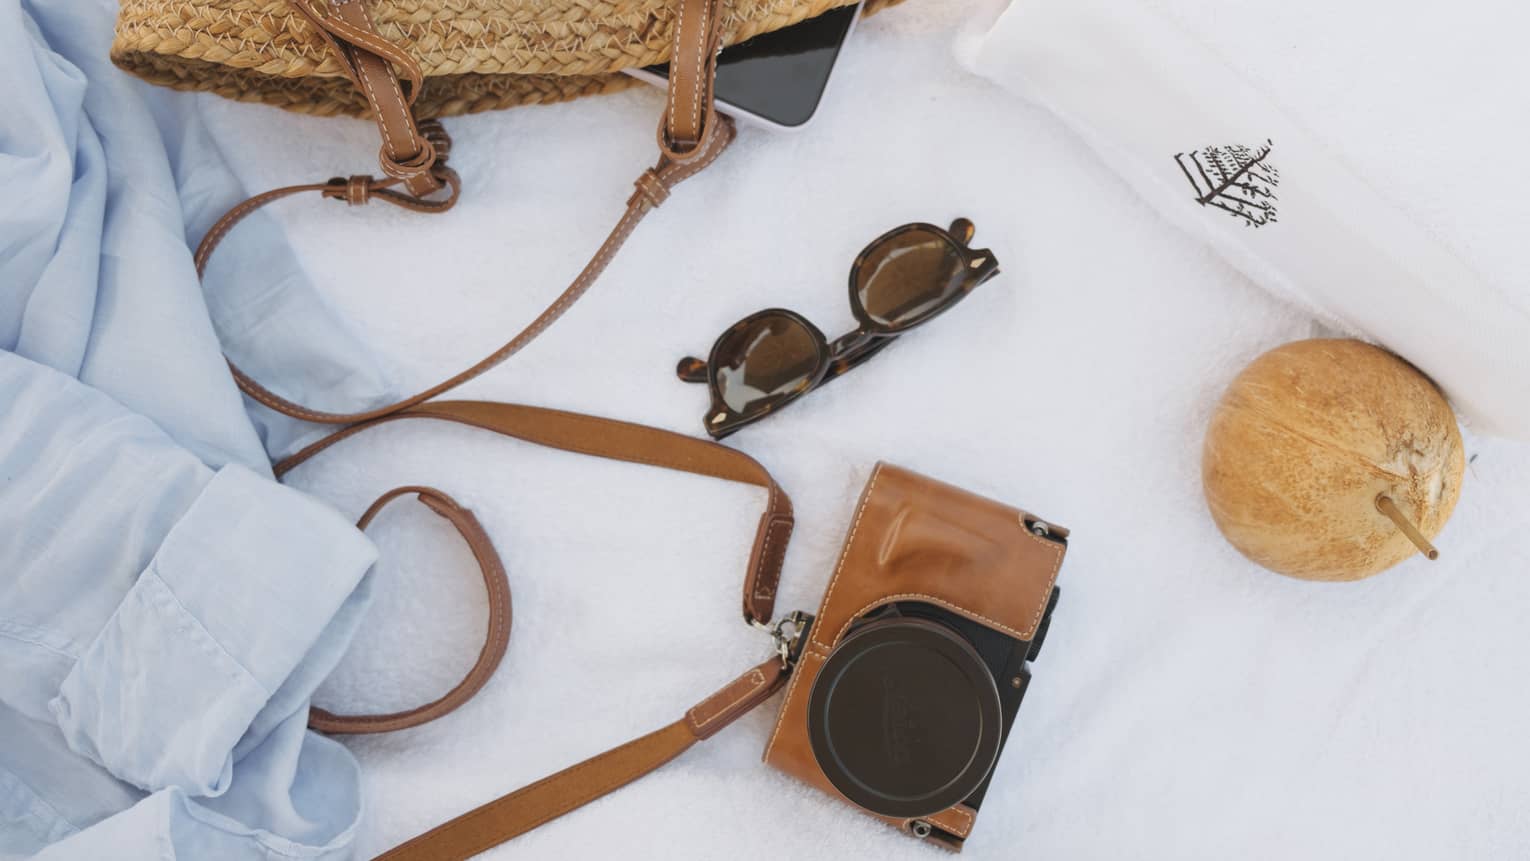 A light-blue overshirt, straw basket with brown leather straps, sunglasses, a camera in a brown leather case, a white Four Seasons towel and a coconut with a straw sticking out of it lay on top of a crisp white blanket